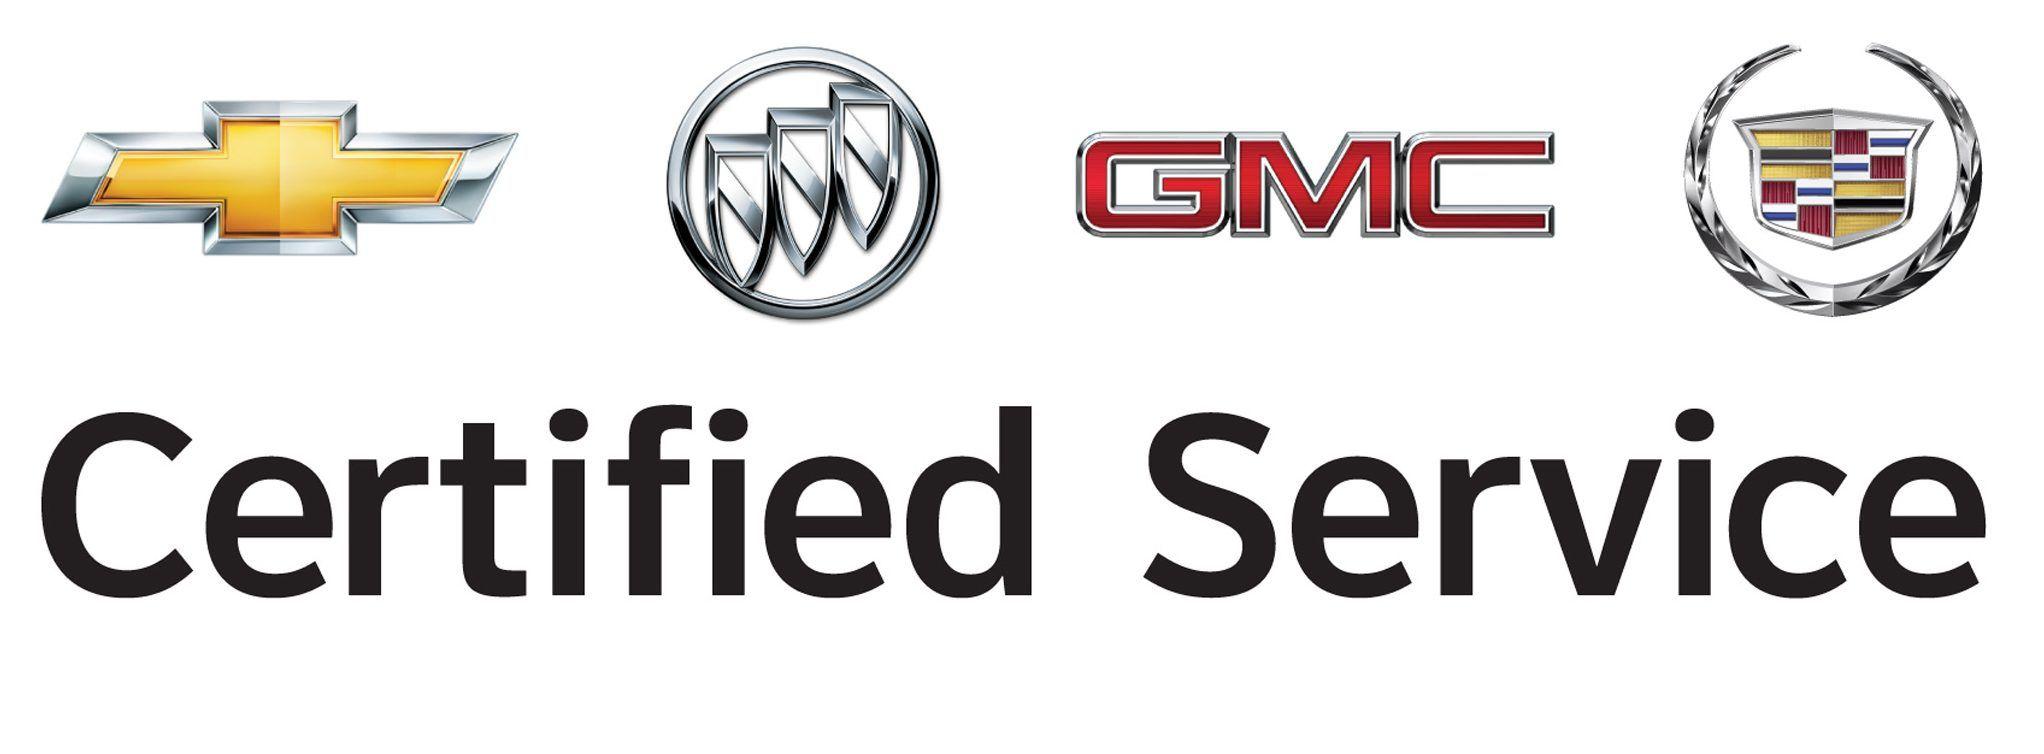 Certified Cadillac Logo - Certified Service Launches at Chevrolet, Buick, GMC and Cadillac